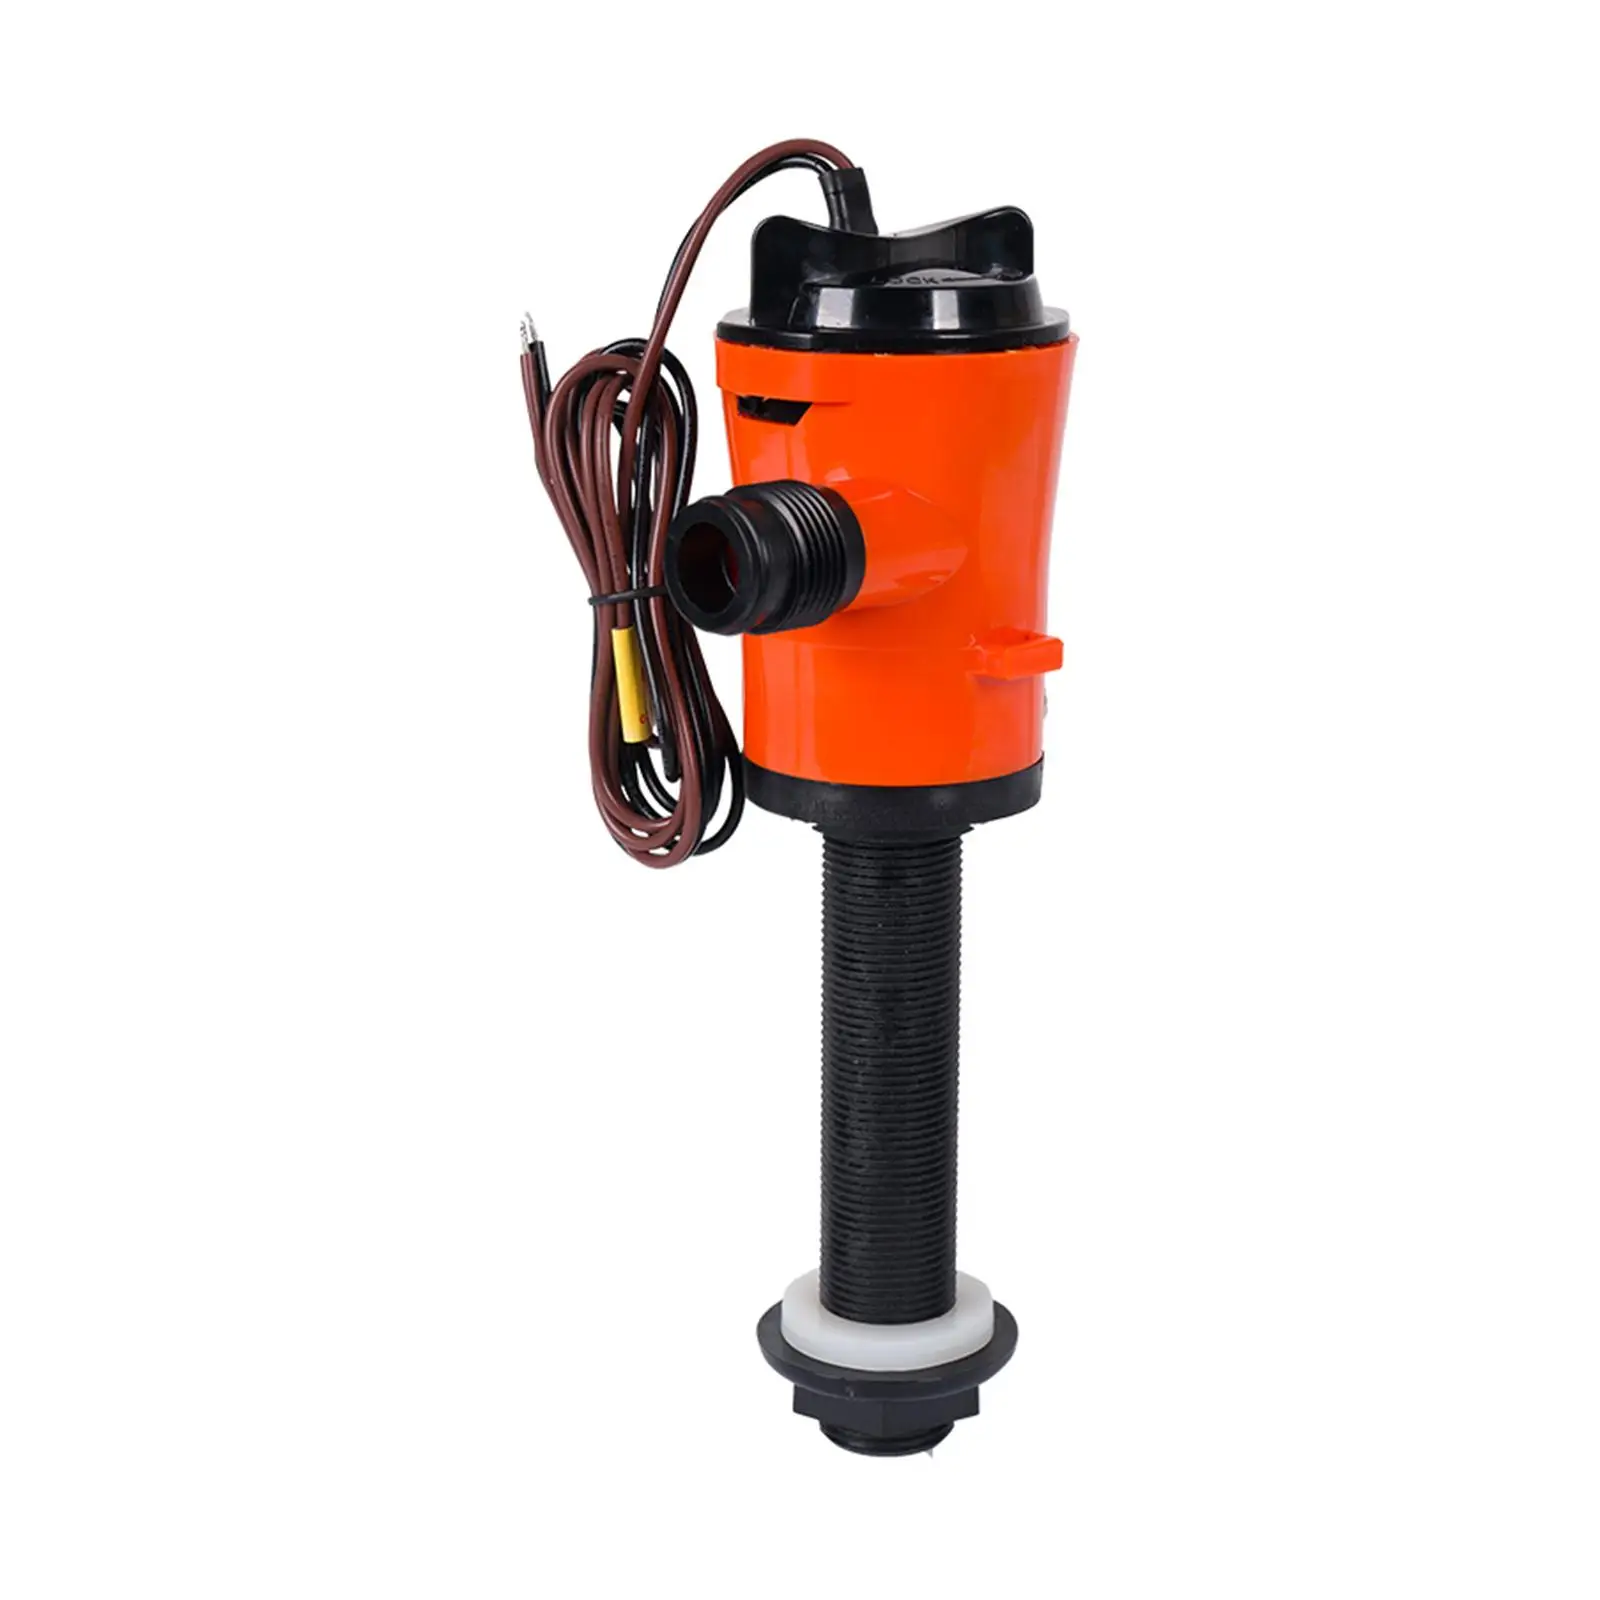 Livewell Pump Boat Tools Professional Easy to Install Boat Aerator Pump